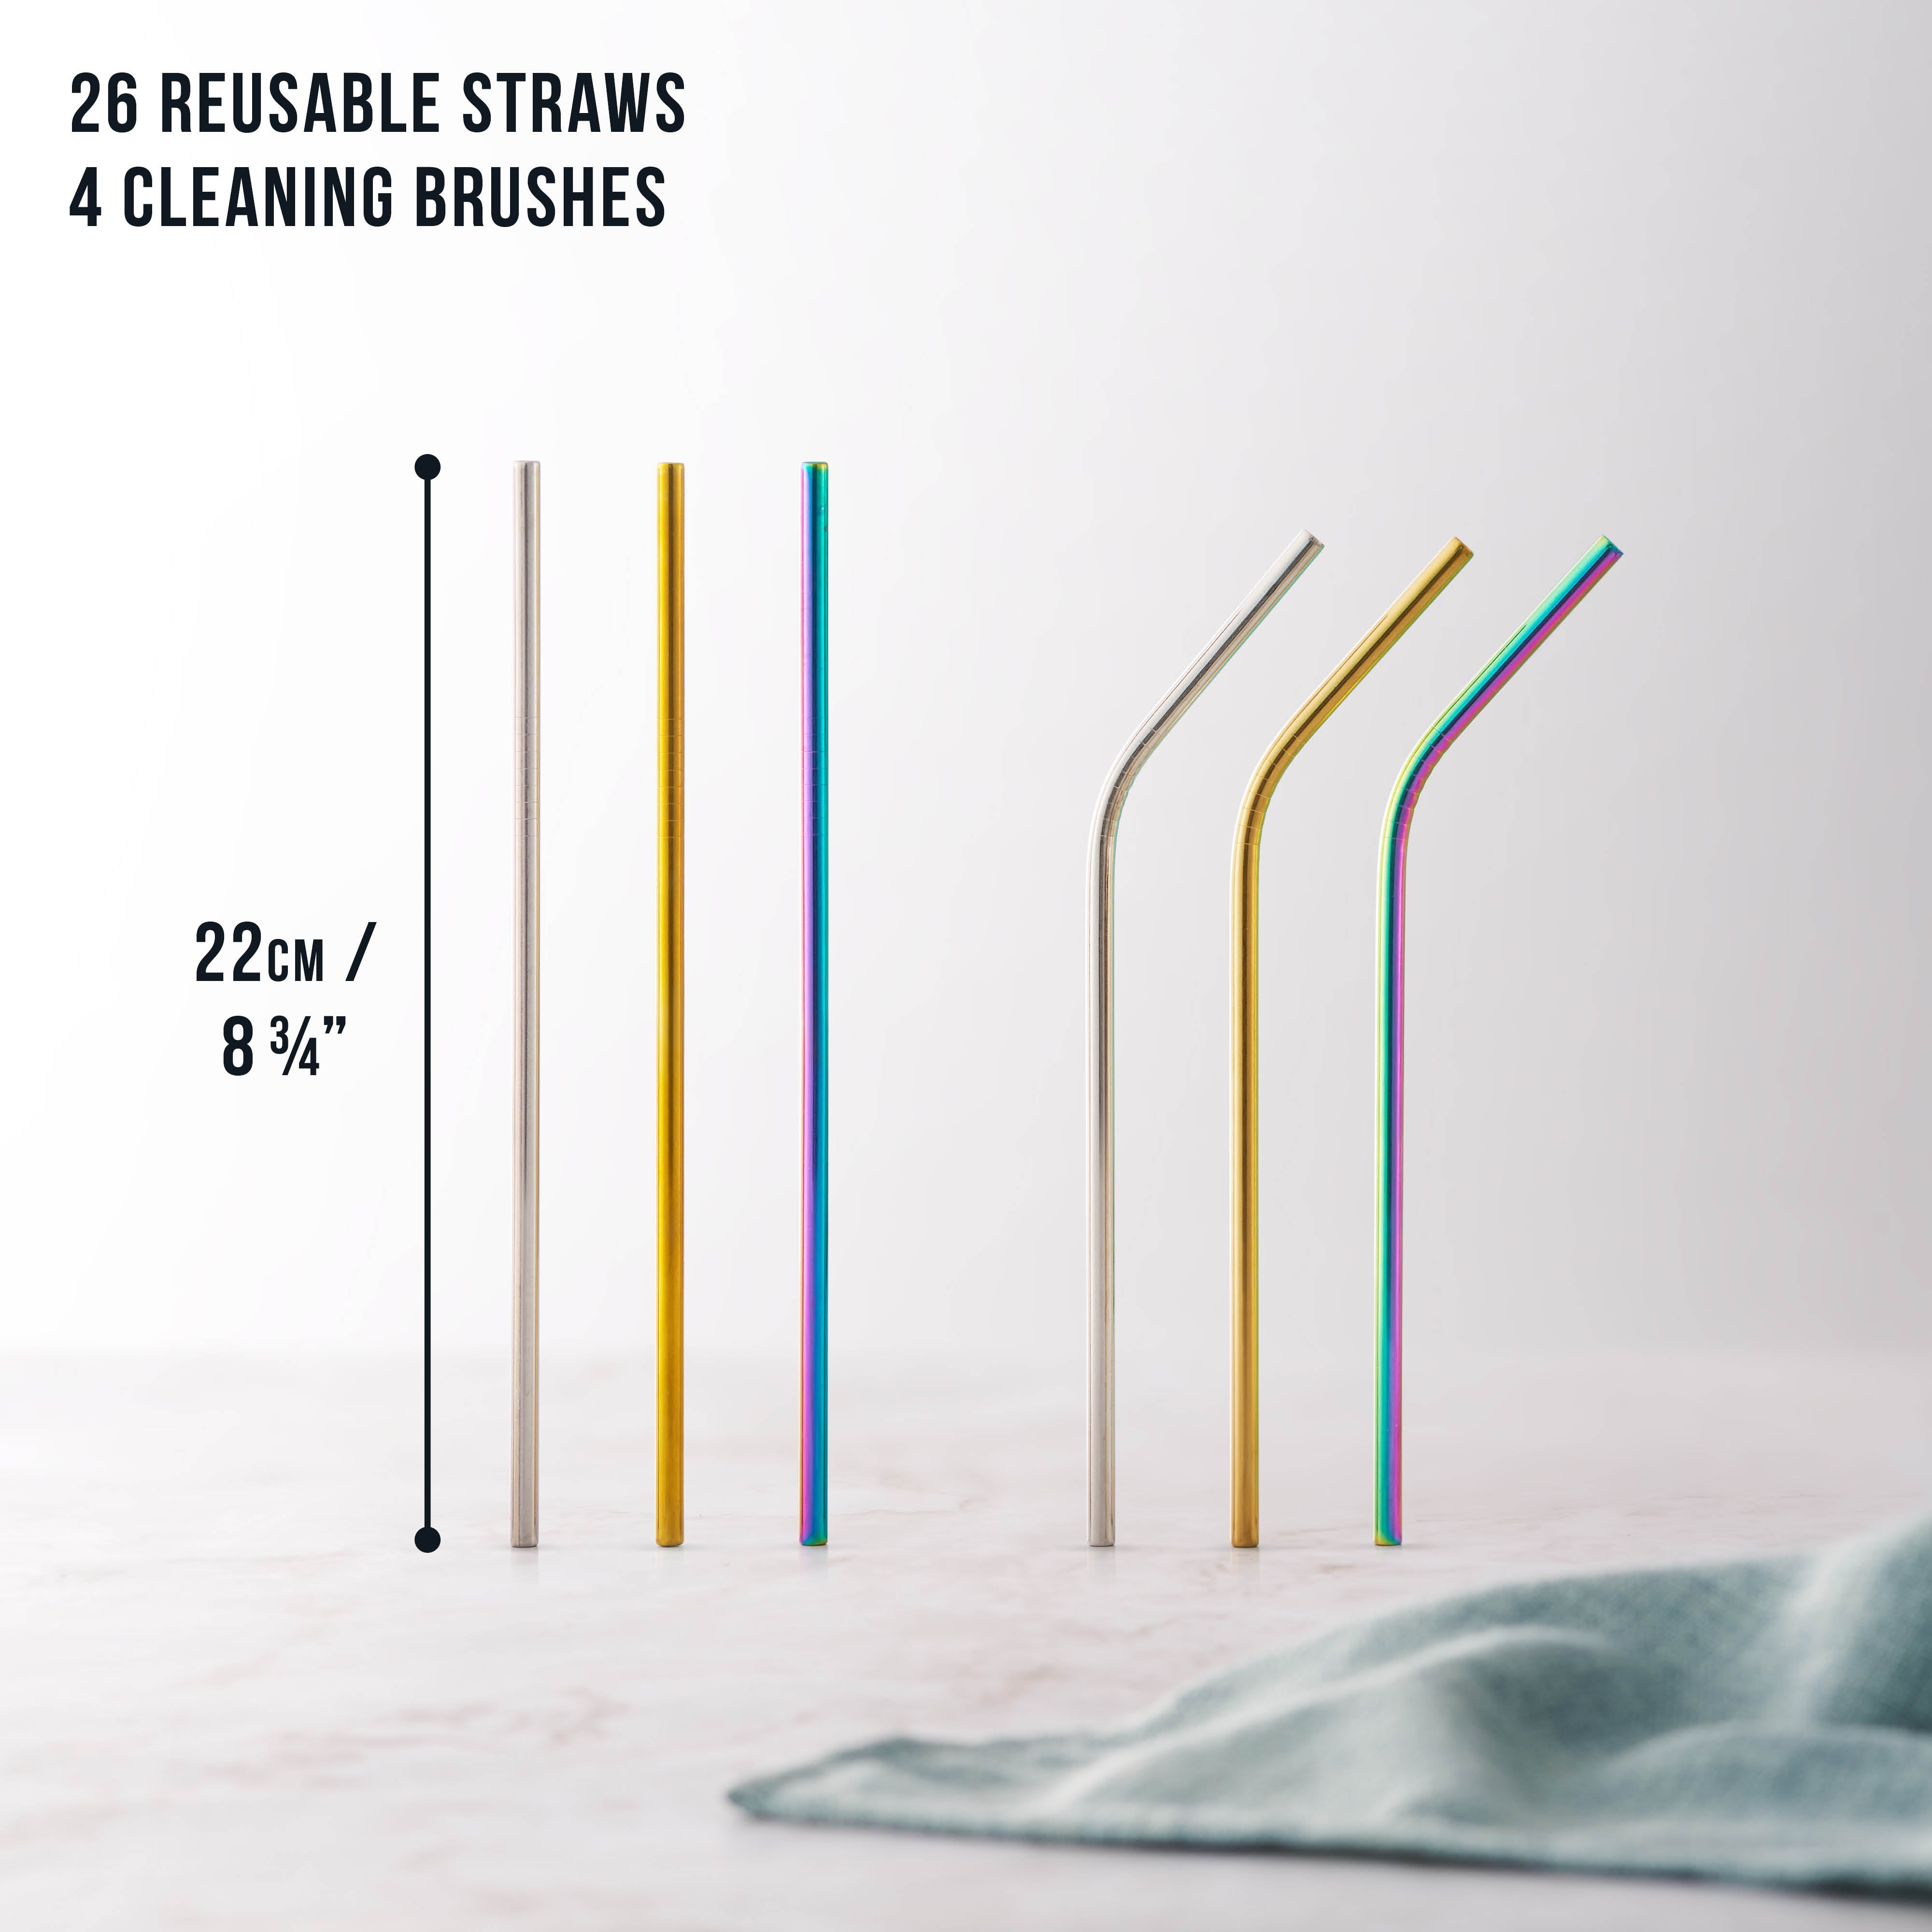 30 Stainless Steel Reusable Straws with 4 Cleaning Brushes